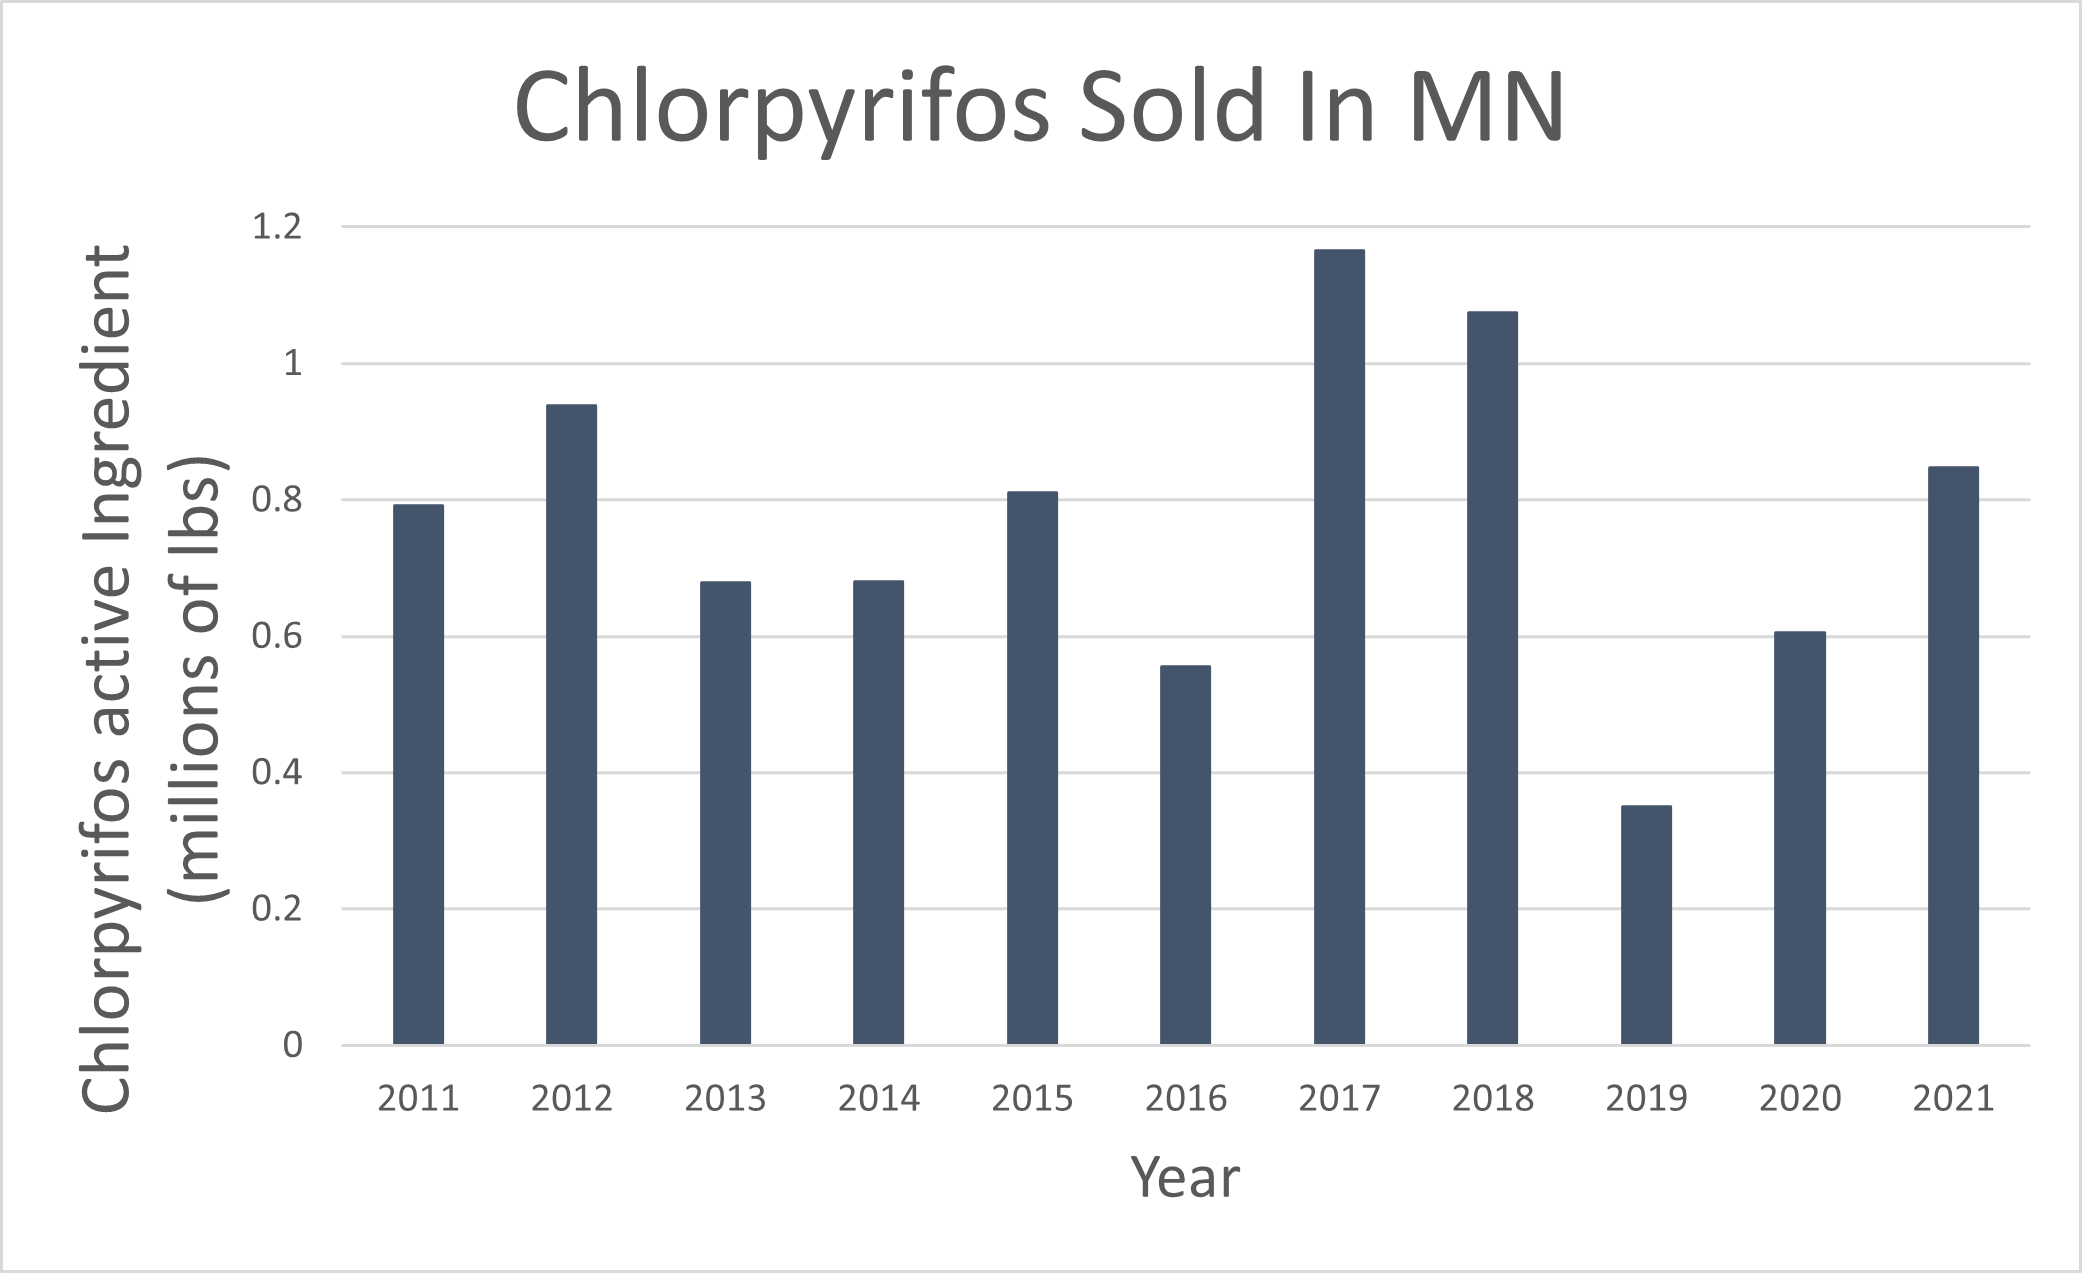 Bar graph showing the pounds of Chlorpyrifos active ingredient sold from 2010-2018 in pounds. Sales data were provided to the MDA by pesticide dealers. Values for each year can be found in the MDA's searchable database. http://www2.mda.state.mn.us/webapp/lis/chemsold_default.jsp